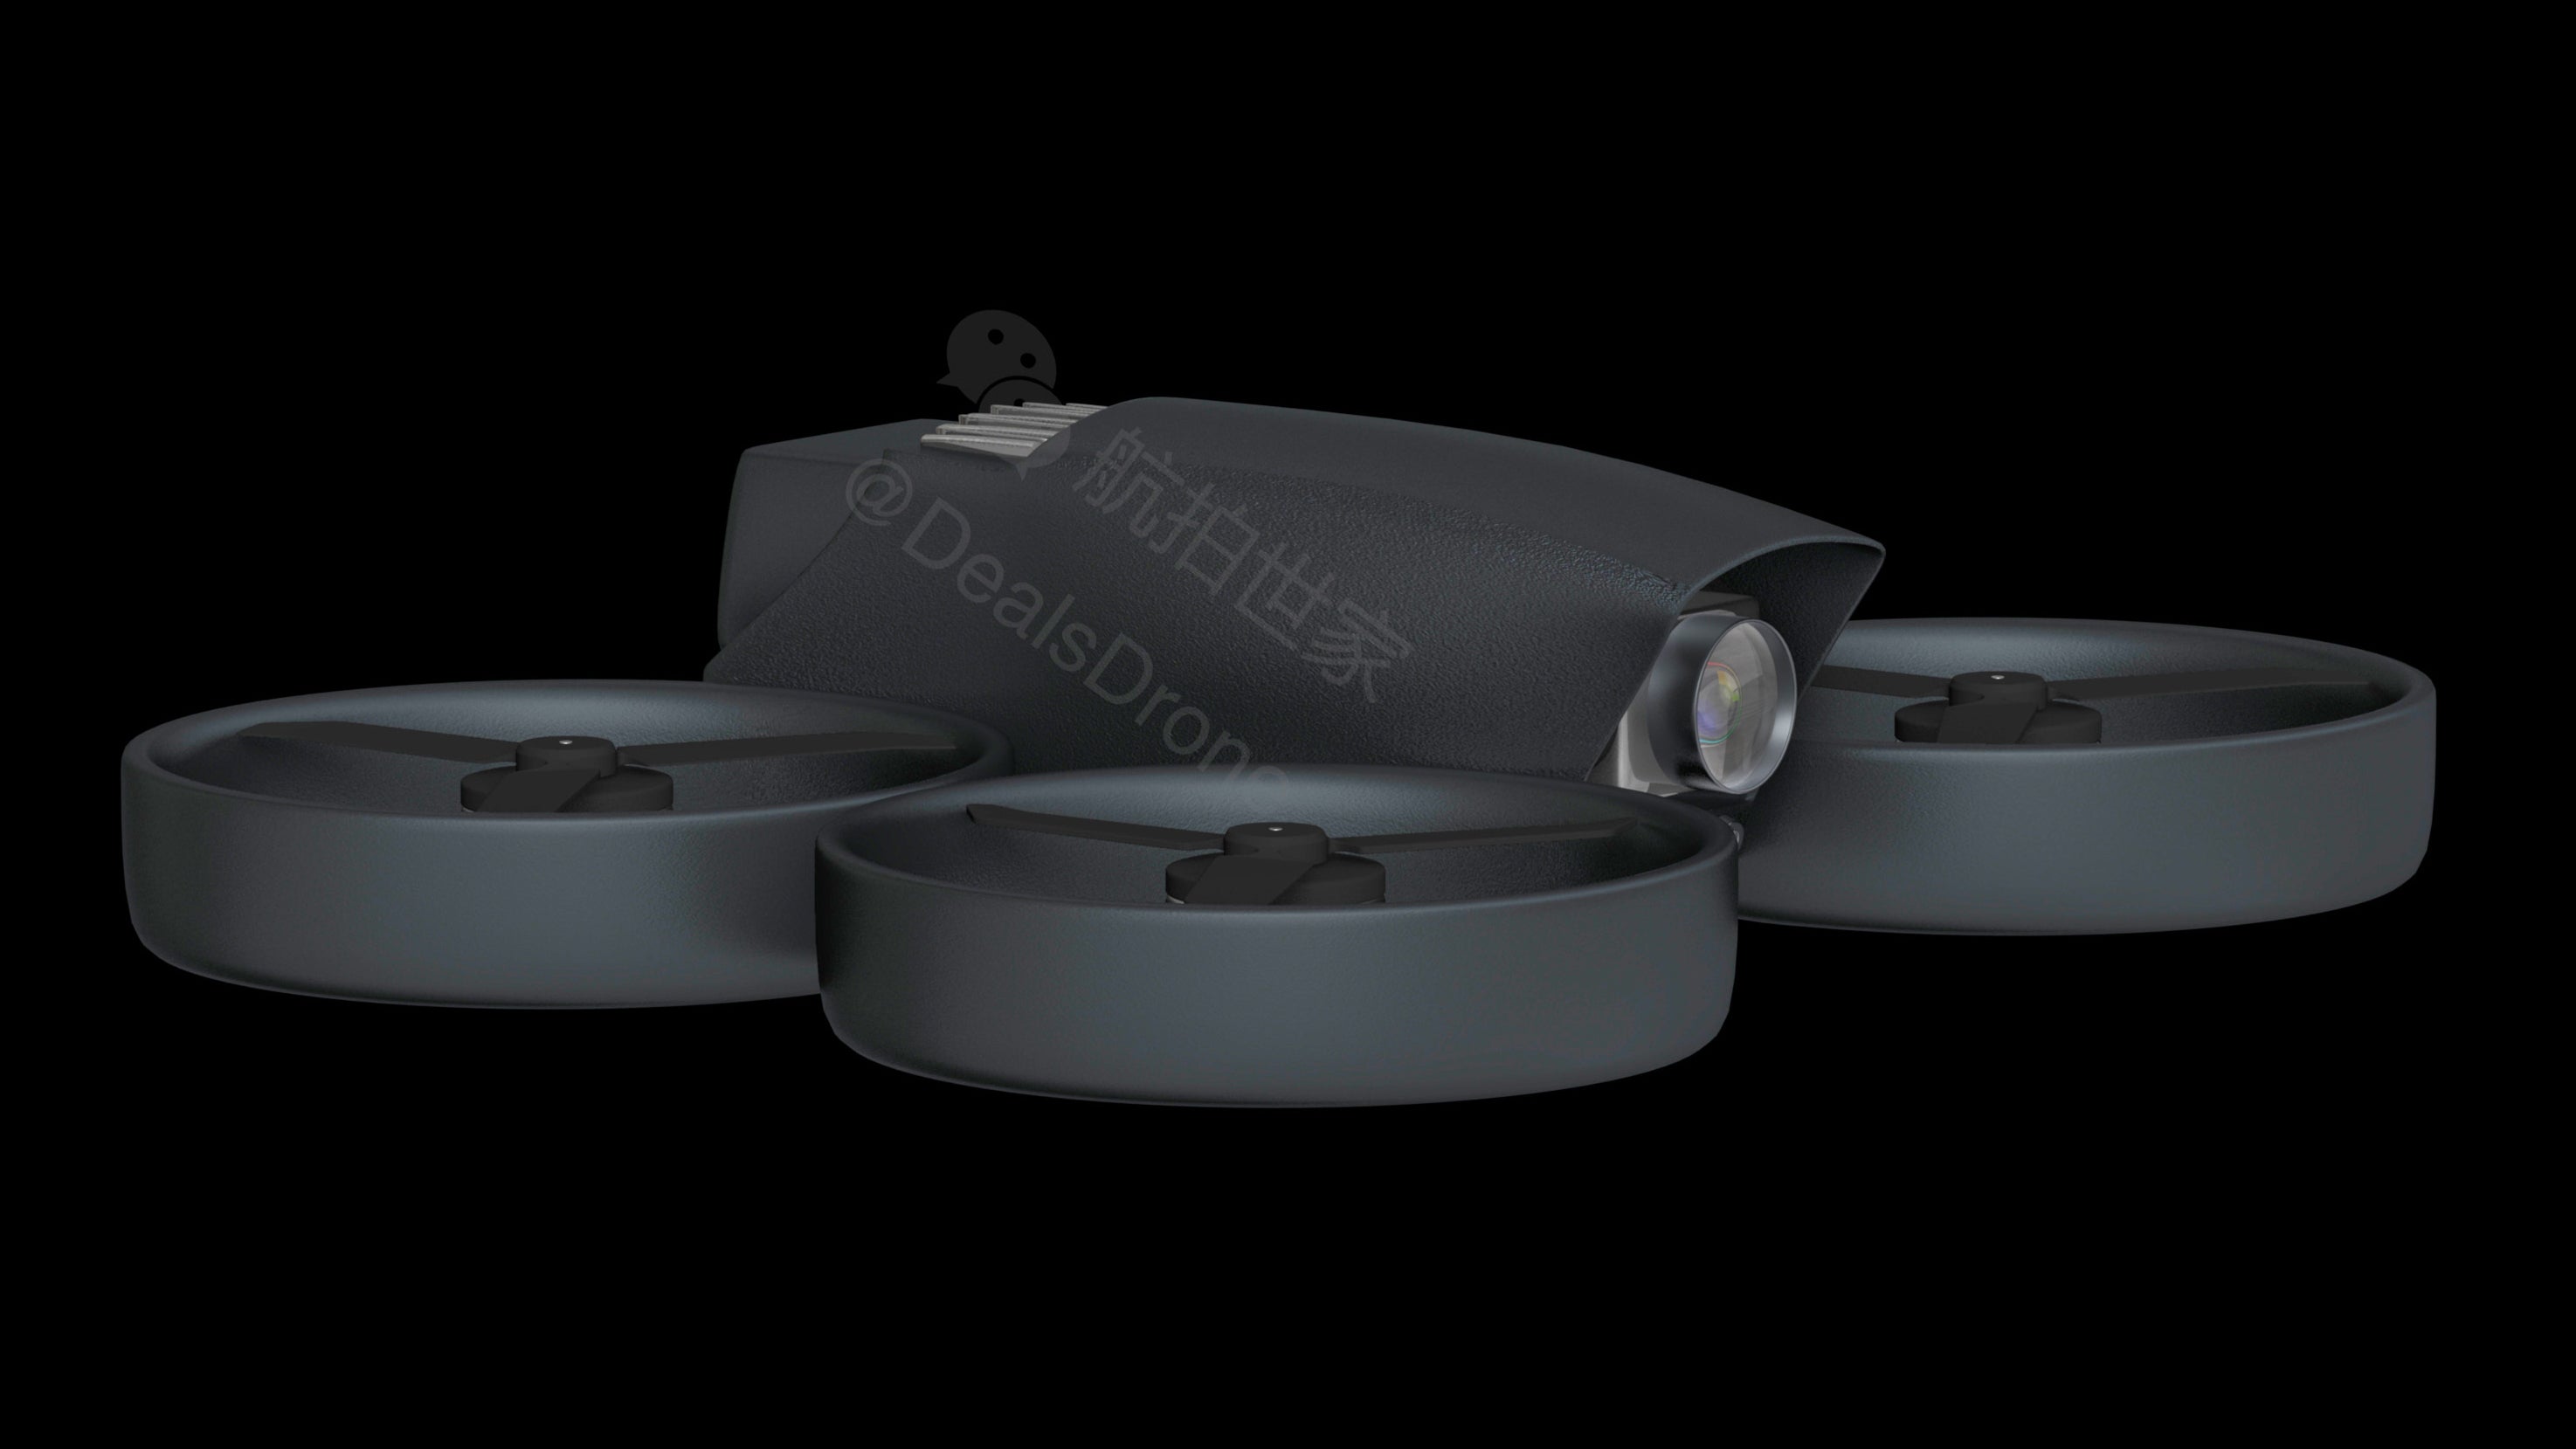 New Leaks Suggest That DJI Might Have an Indoor-Friendly FPV Drone Enroute